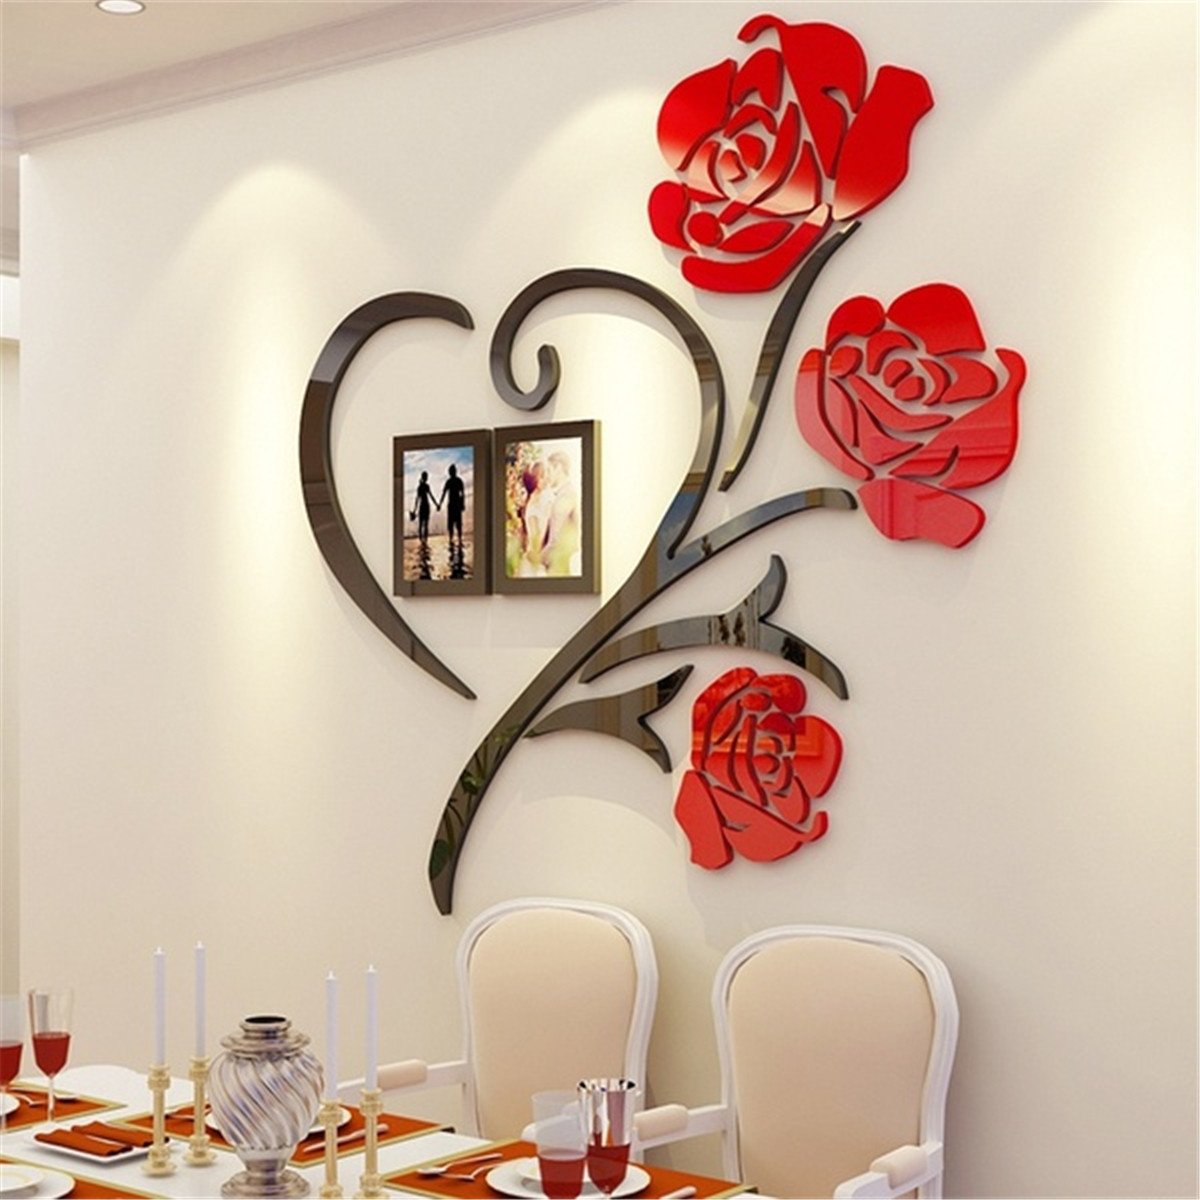 Bedroom Wall Art Stickers Best Of Details About 3d Acrylic Wall Sticker Love Rose Frame Art Decor Living Room Home Decal